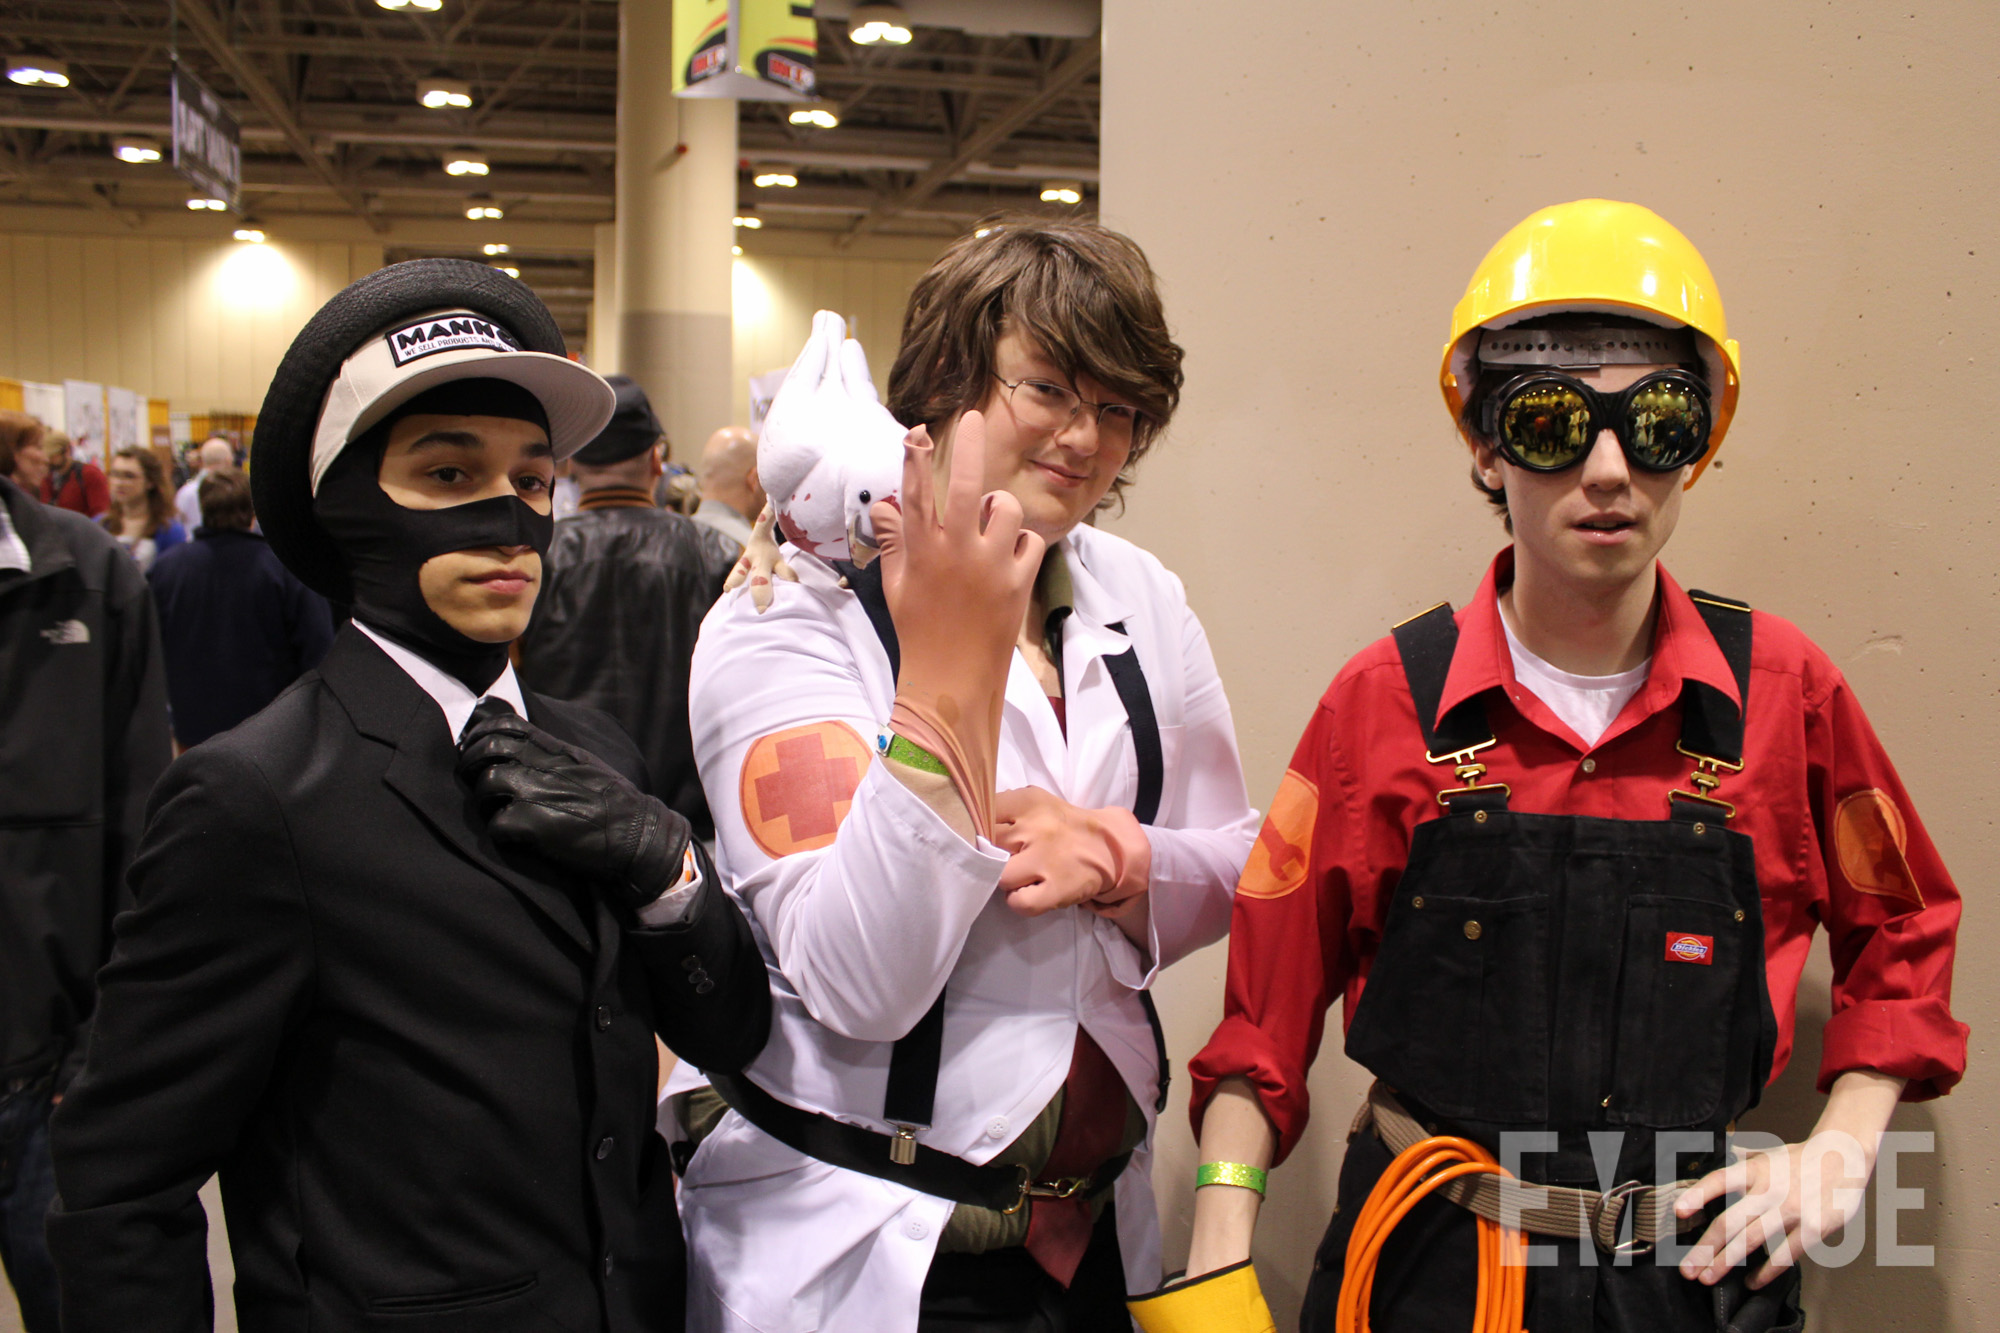 The Spy, Medic and Engineer took a quick break from Team Fortress 2 for a picture